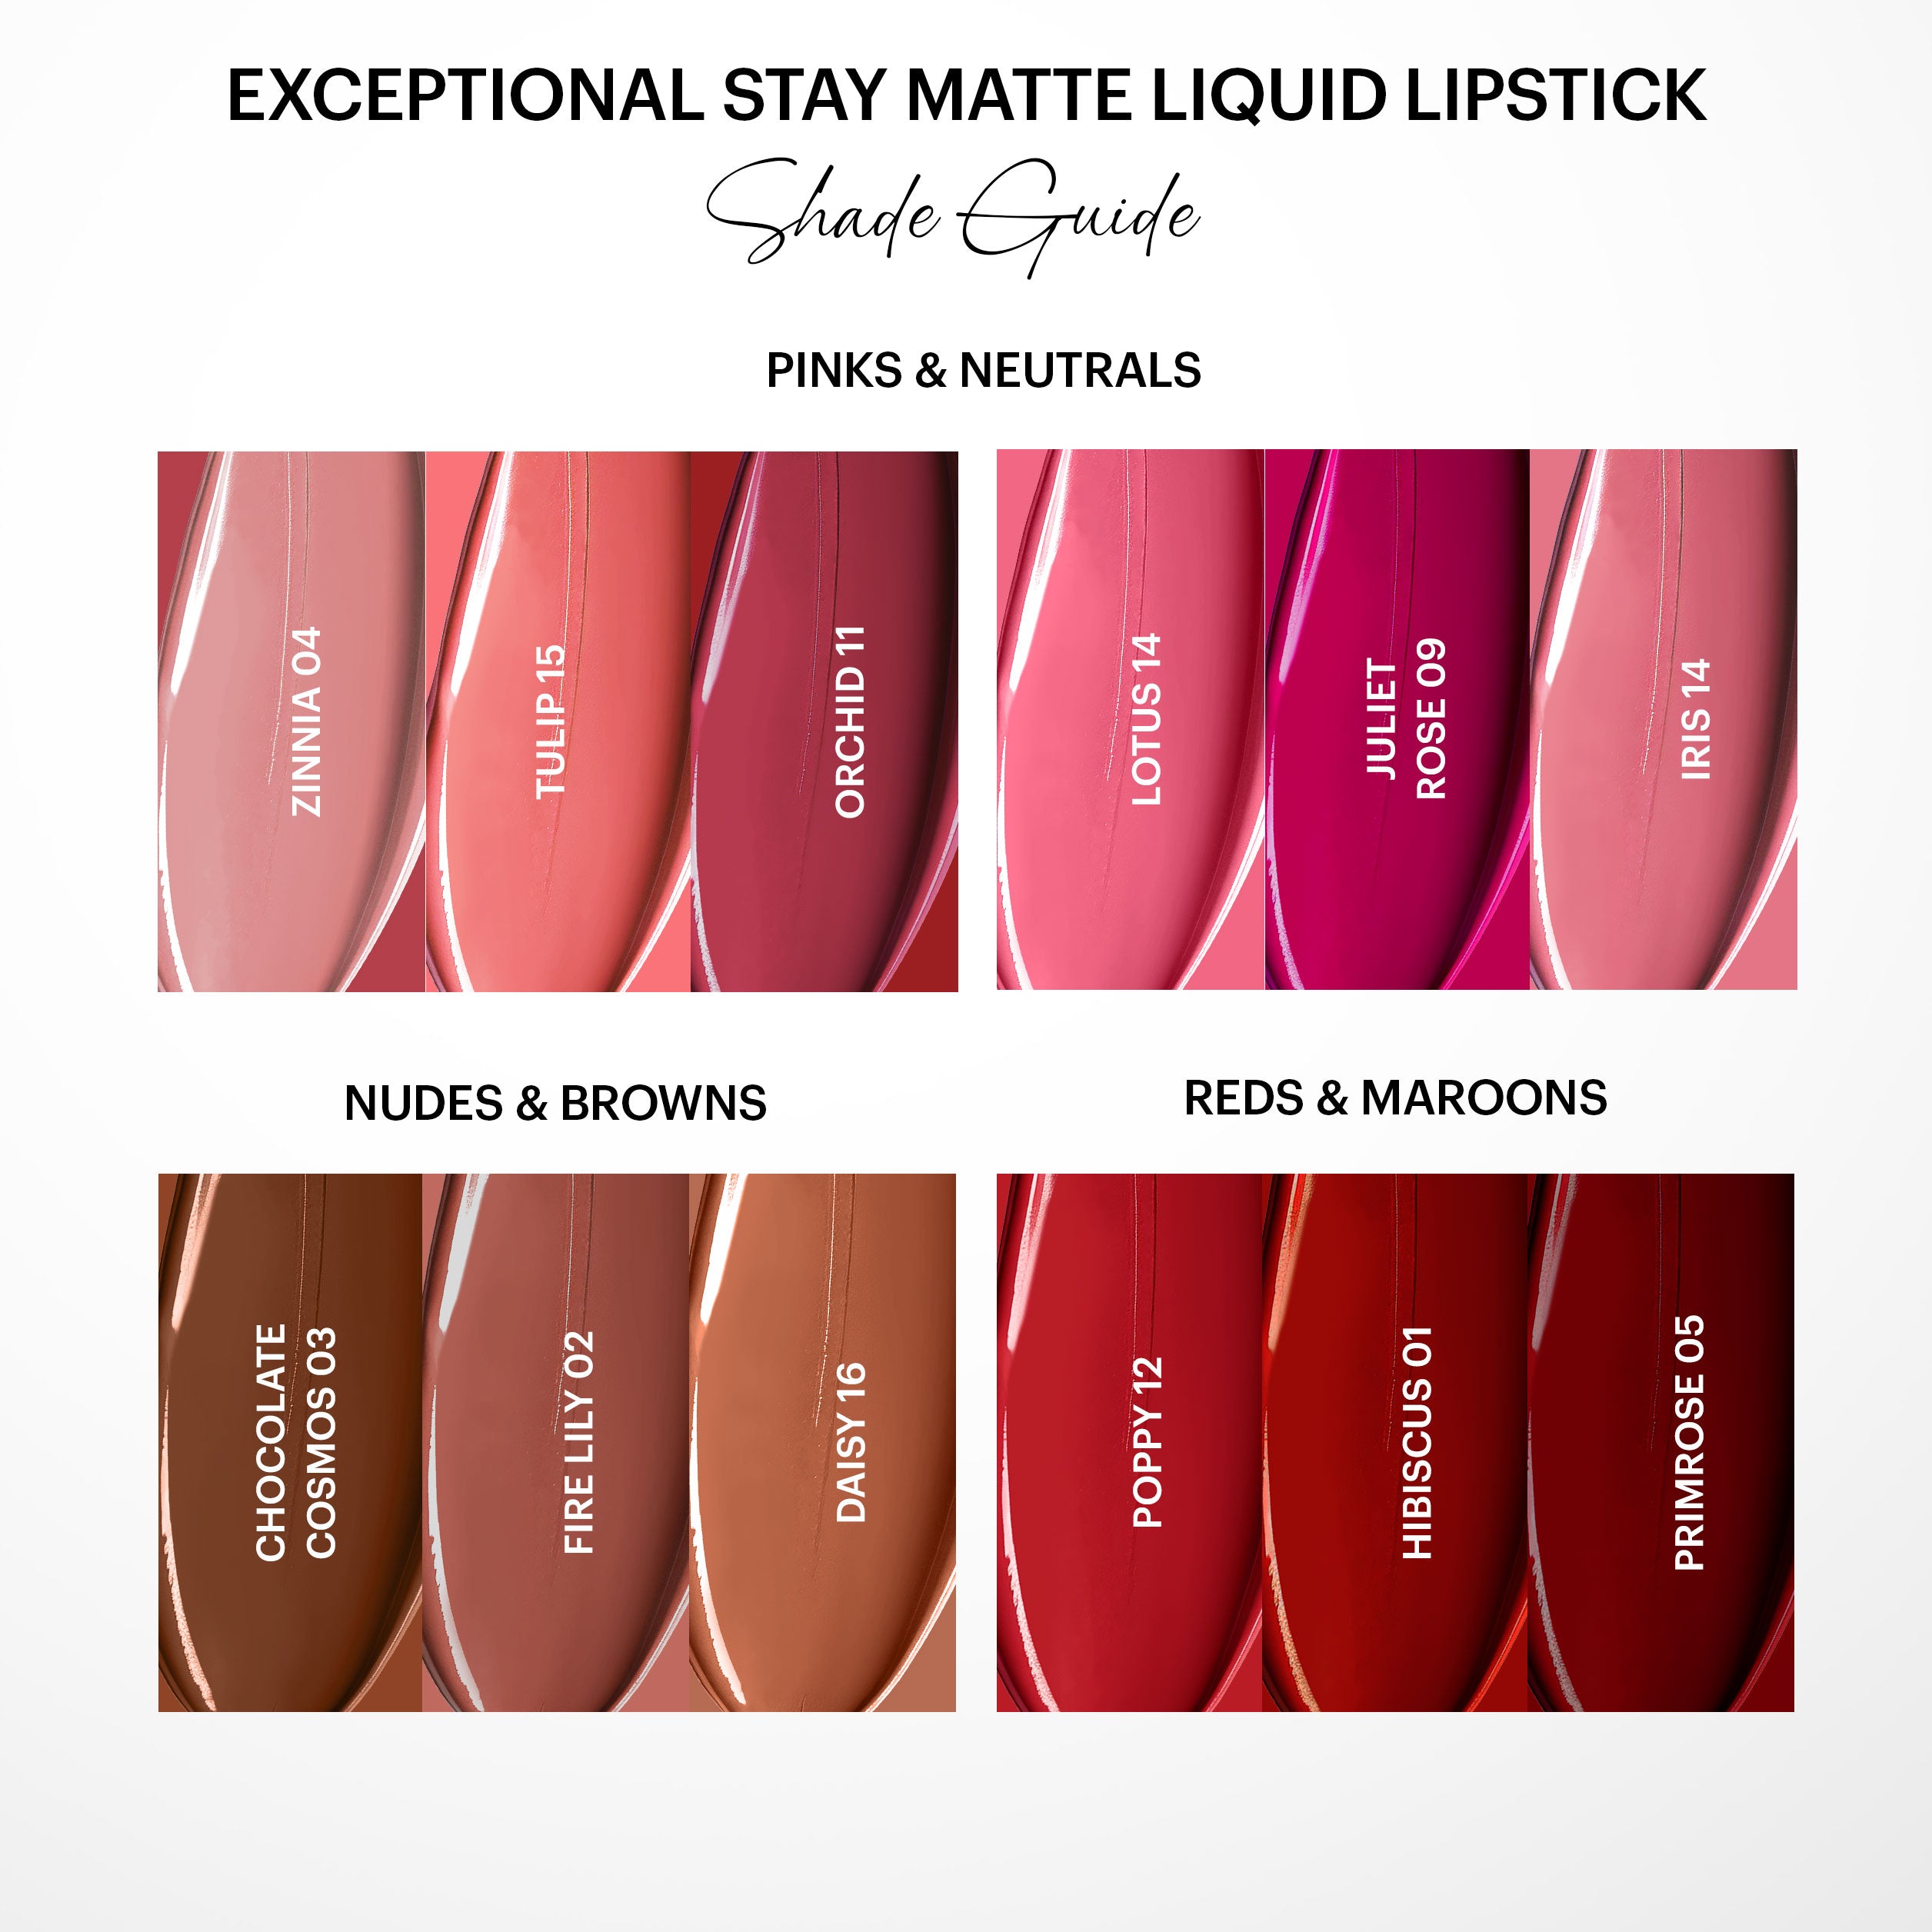 Exceptional Stay Matte Liquid Lipstick Shade: Fire Lily 02